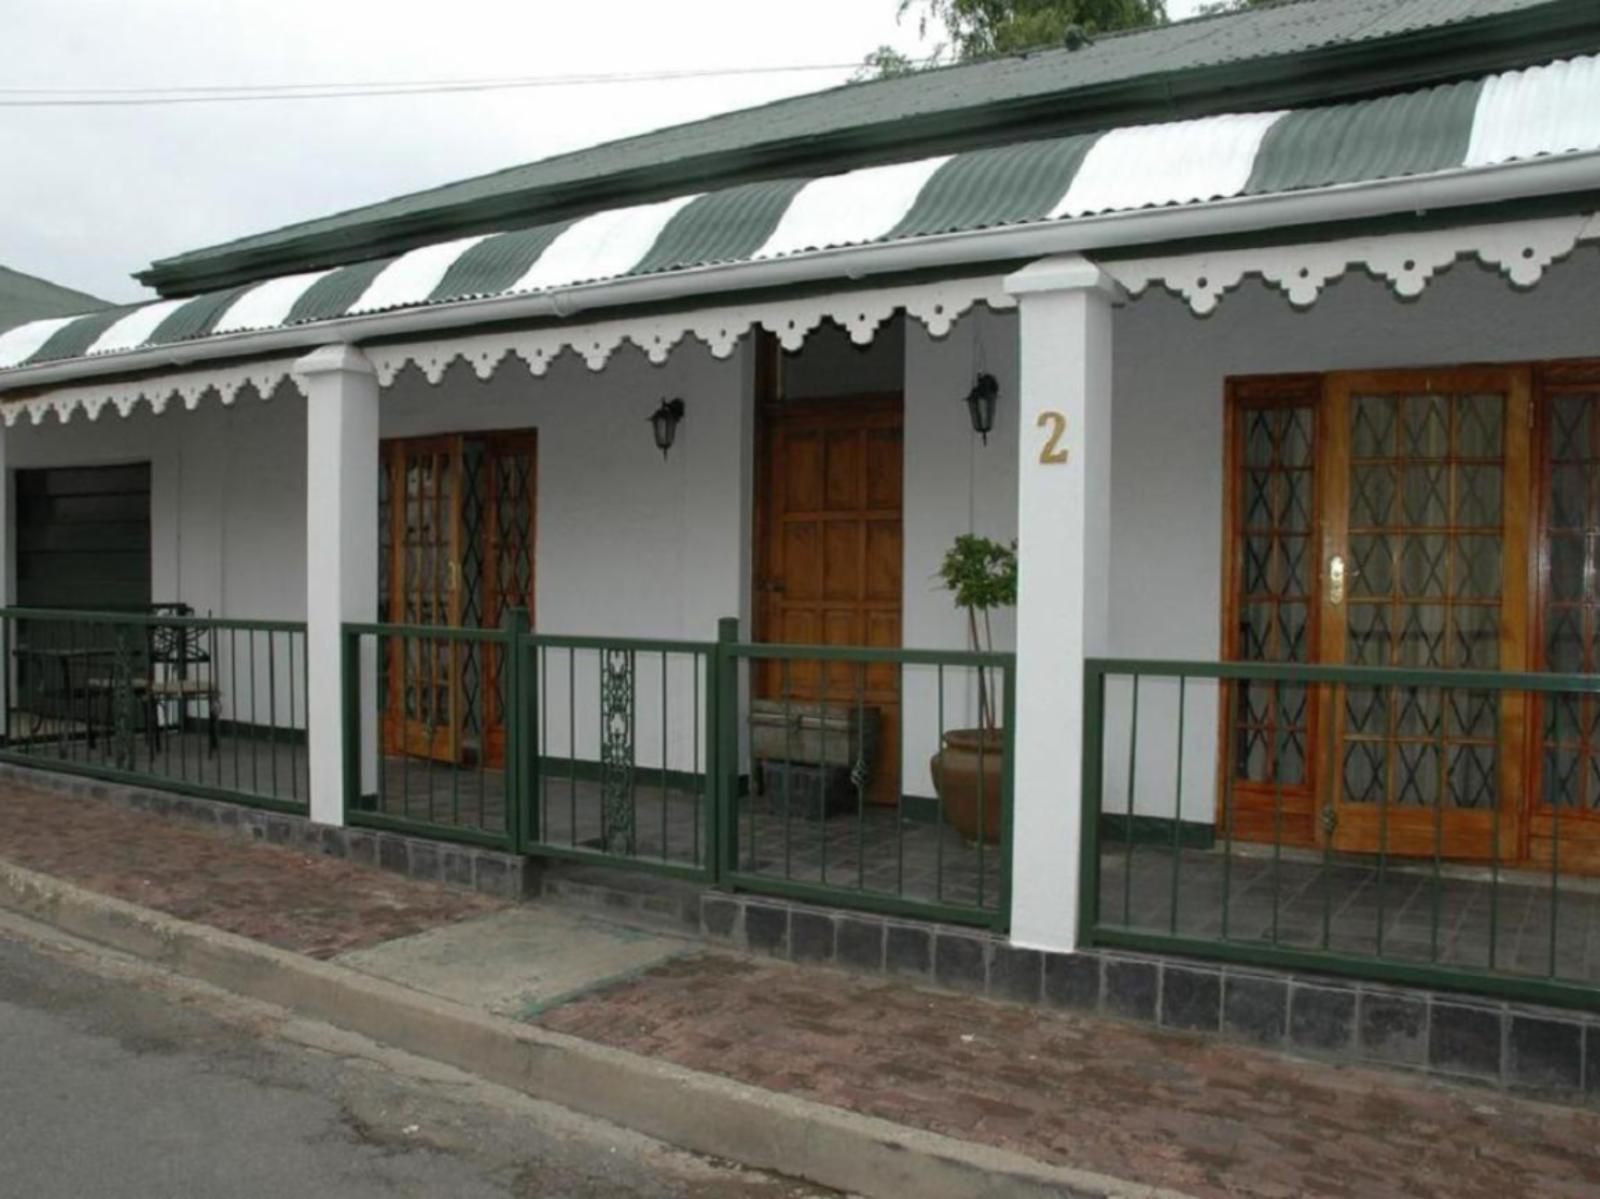 Horse And Mill Guest House Colesberg Northern Cape South Africa House, Building, Architecture